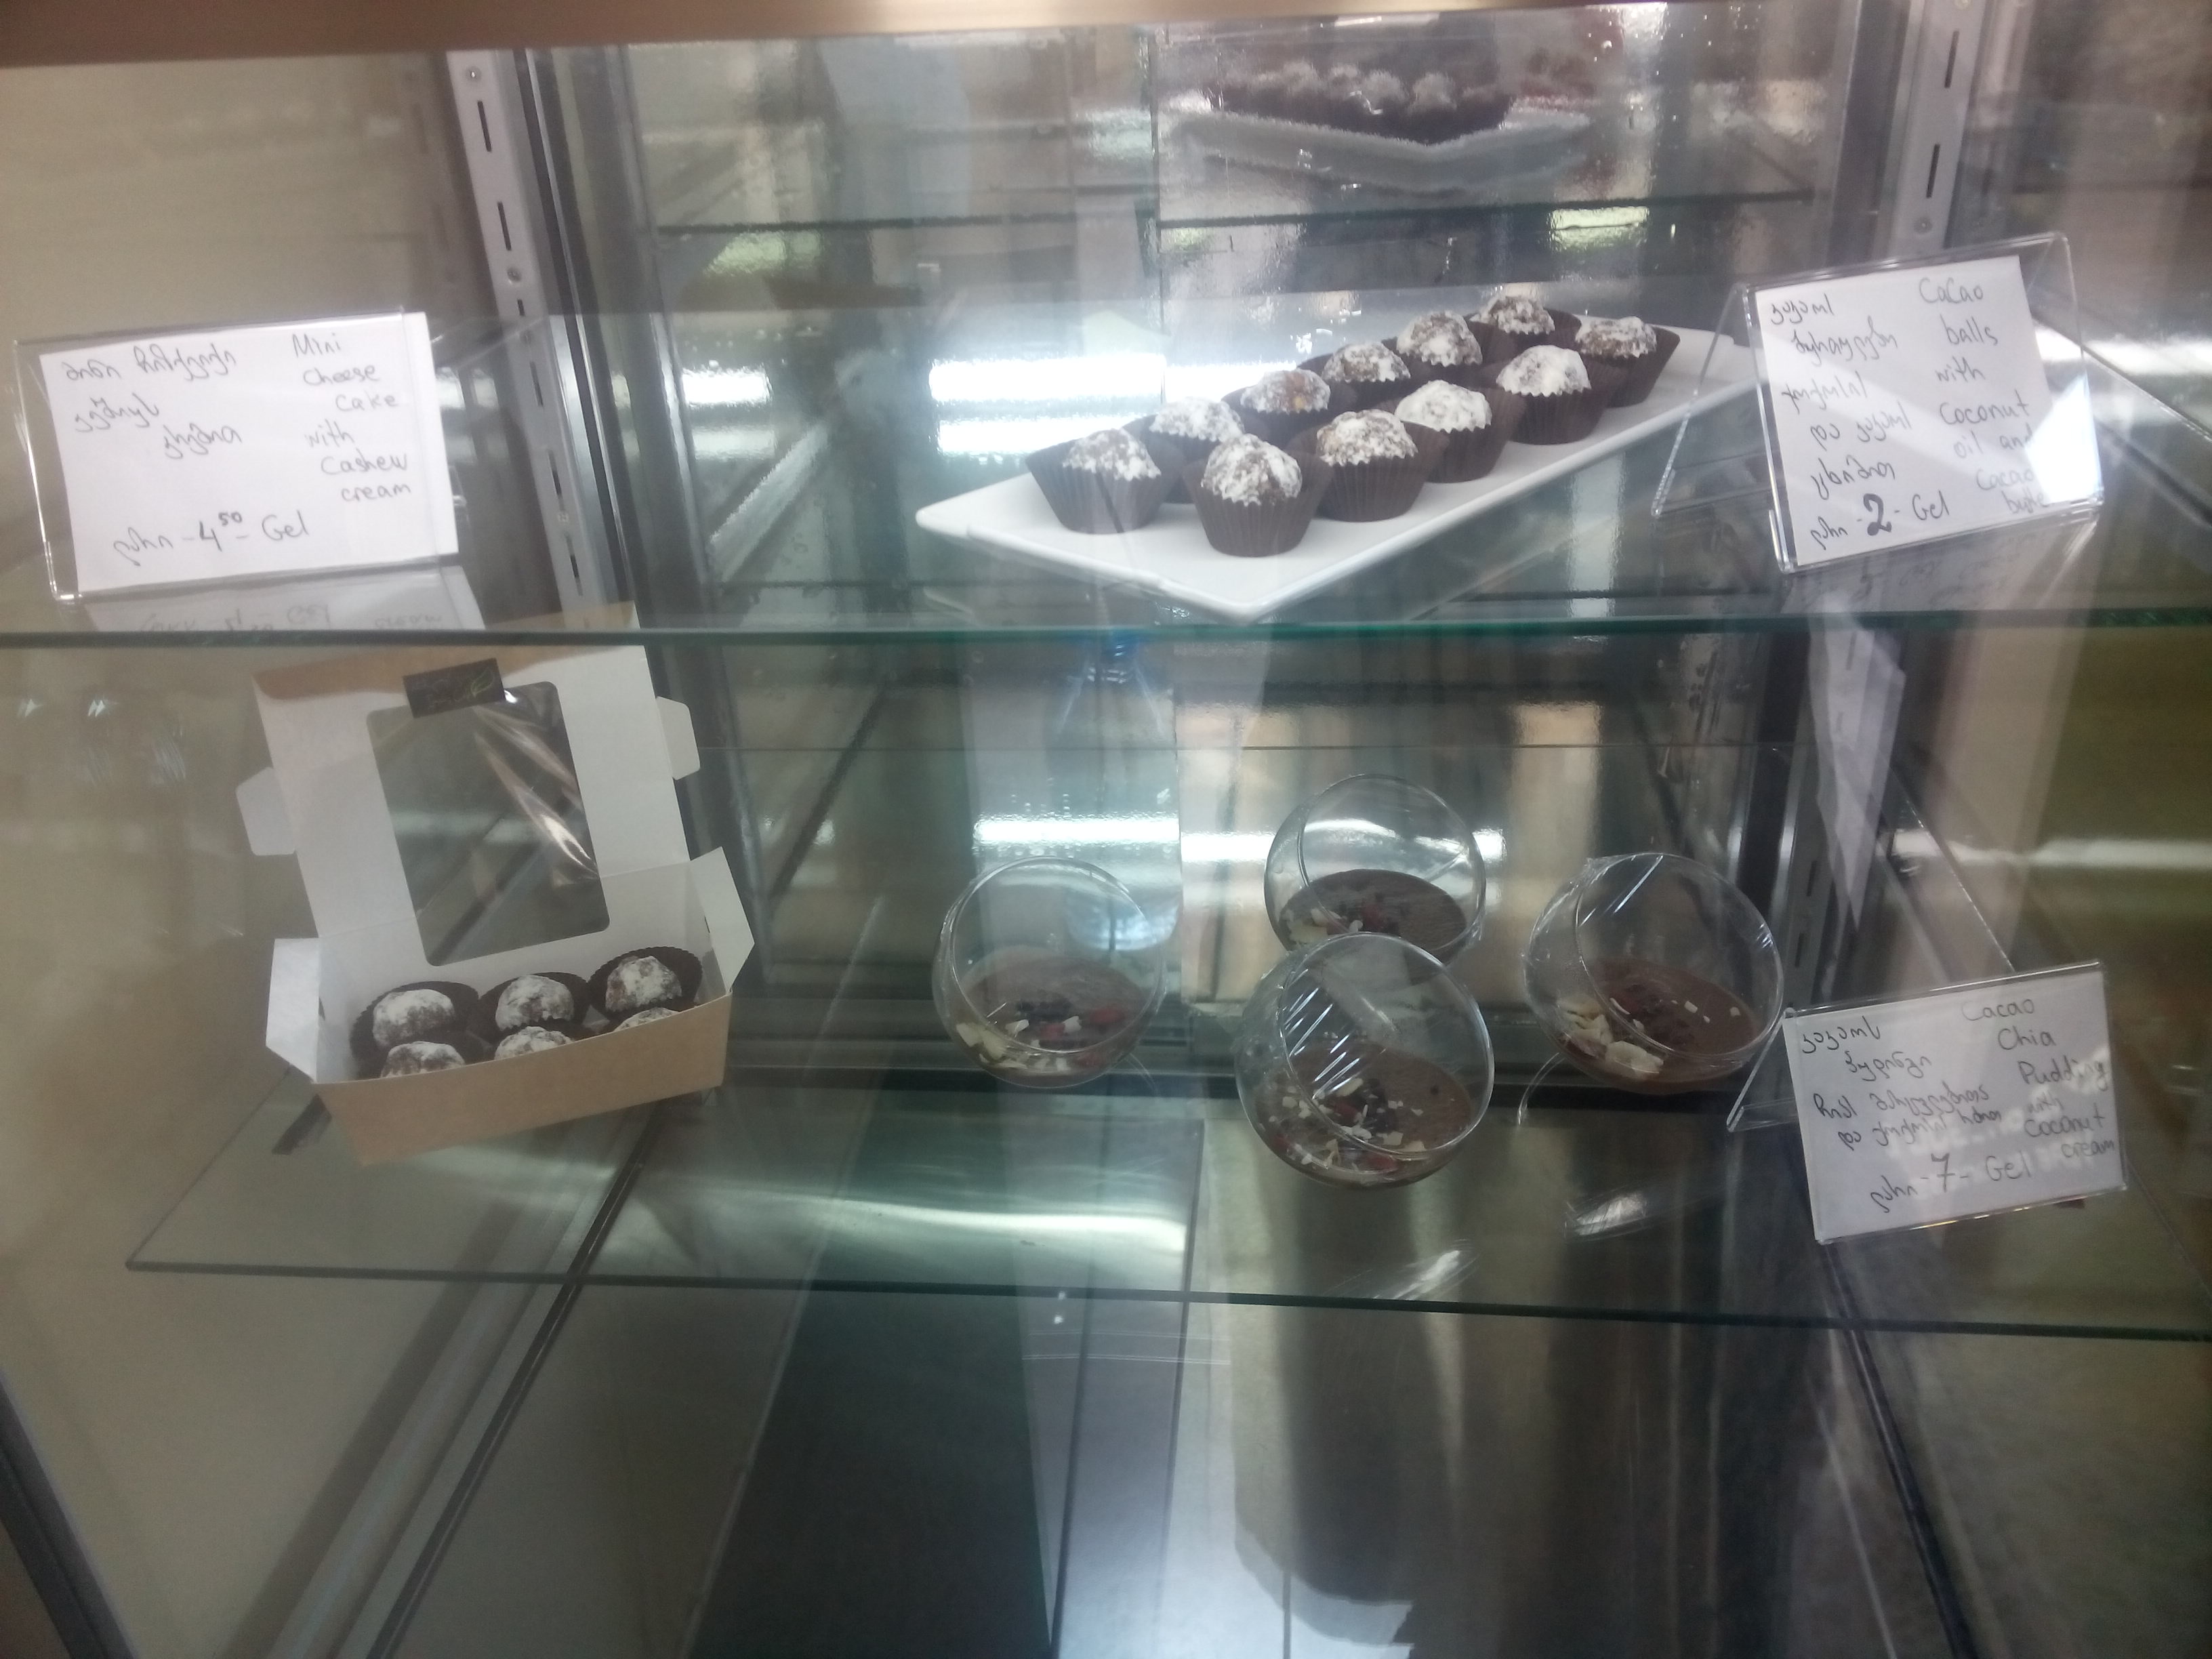 A glass cabinet with lots of light reflections, inside of which are a selection of small cakes